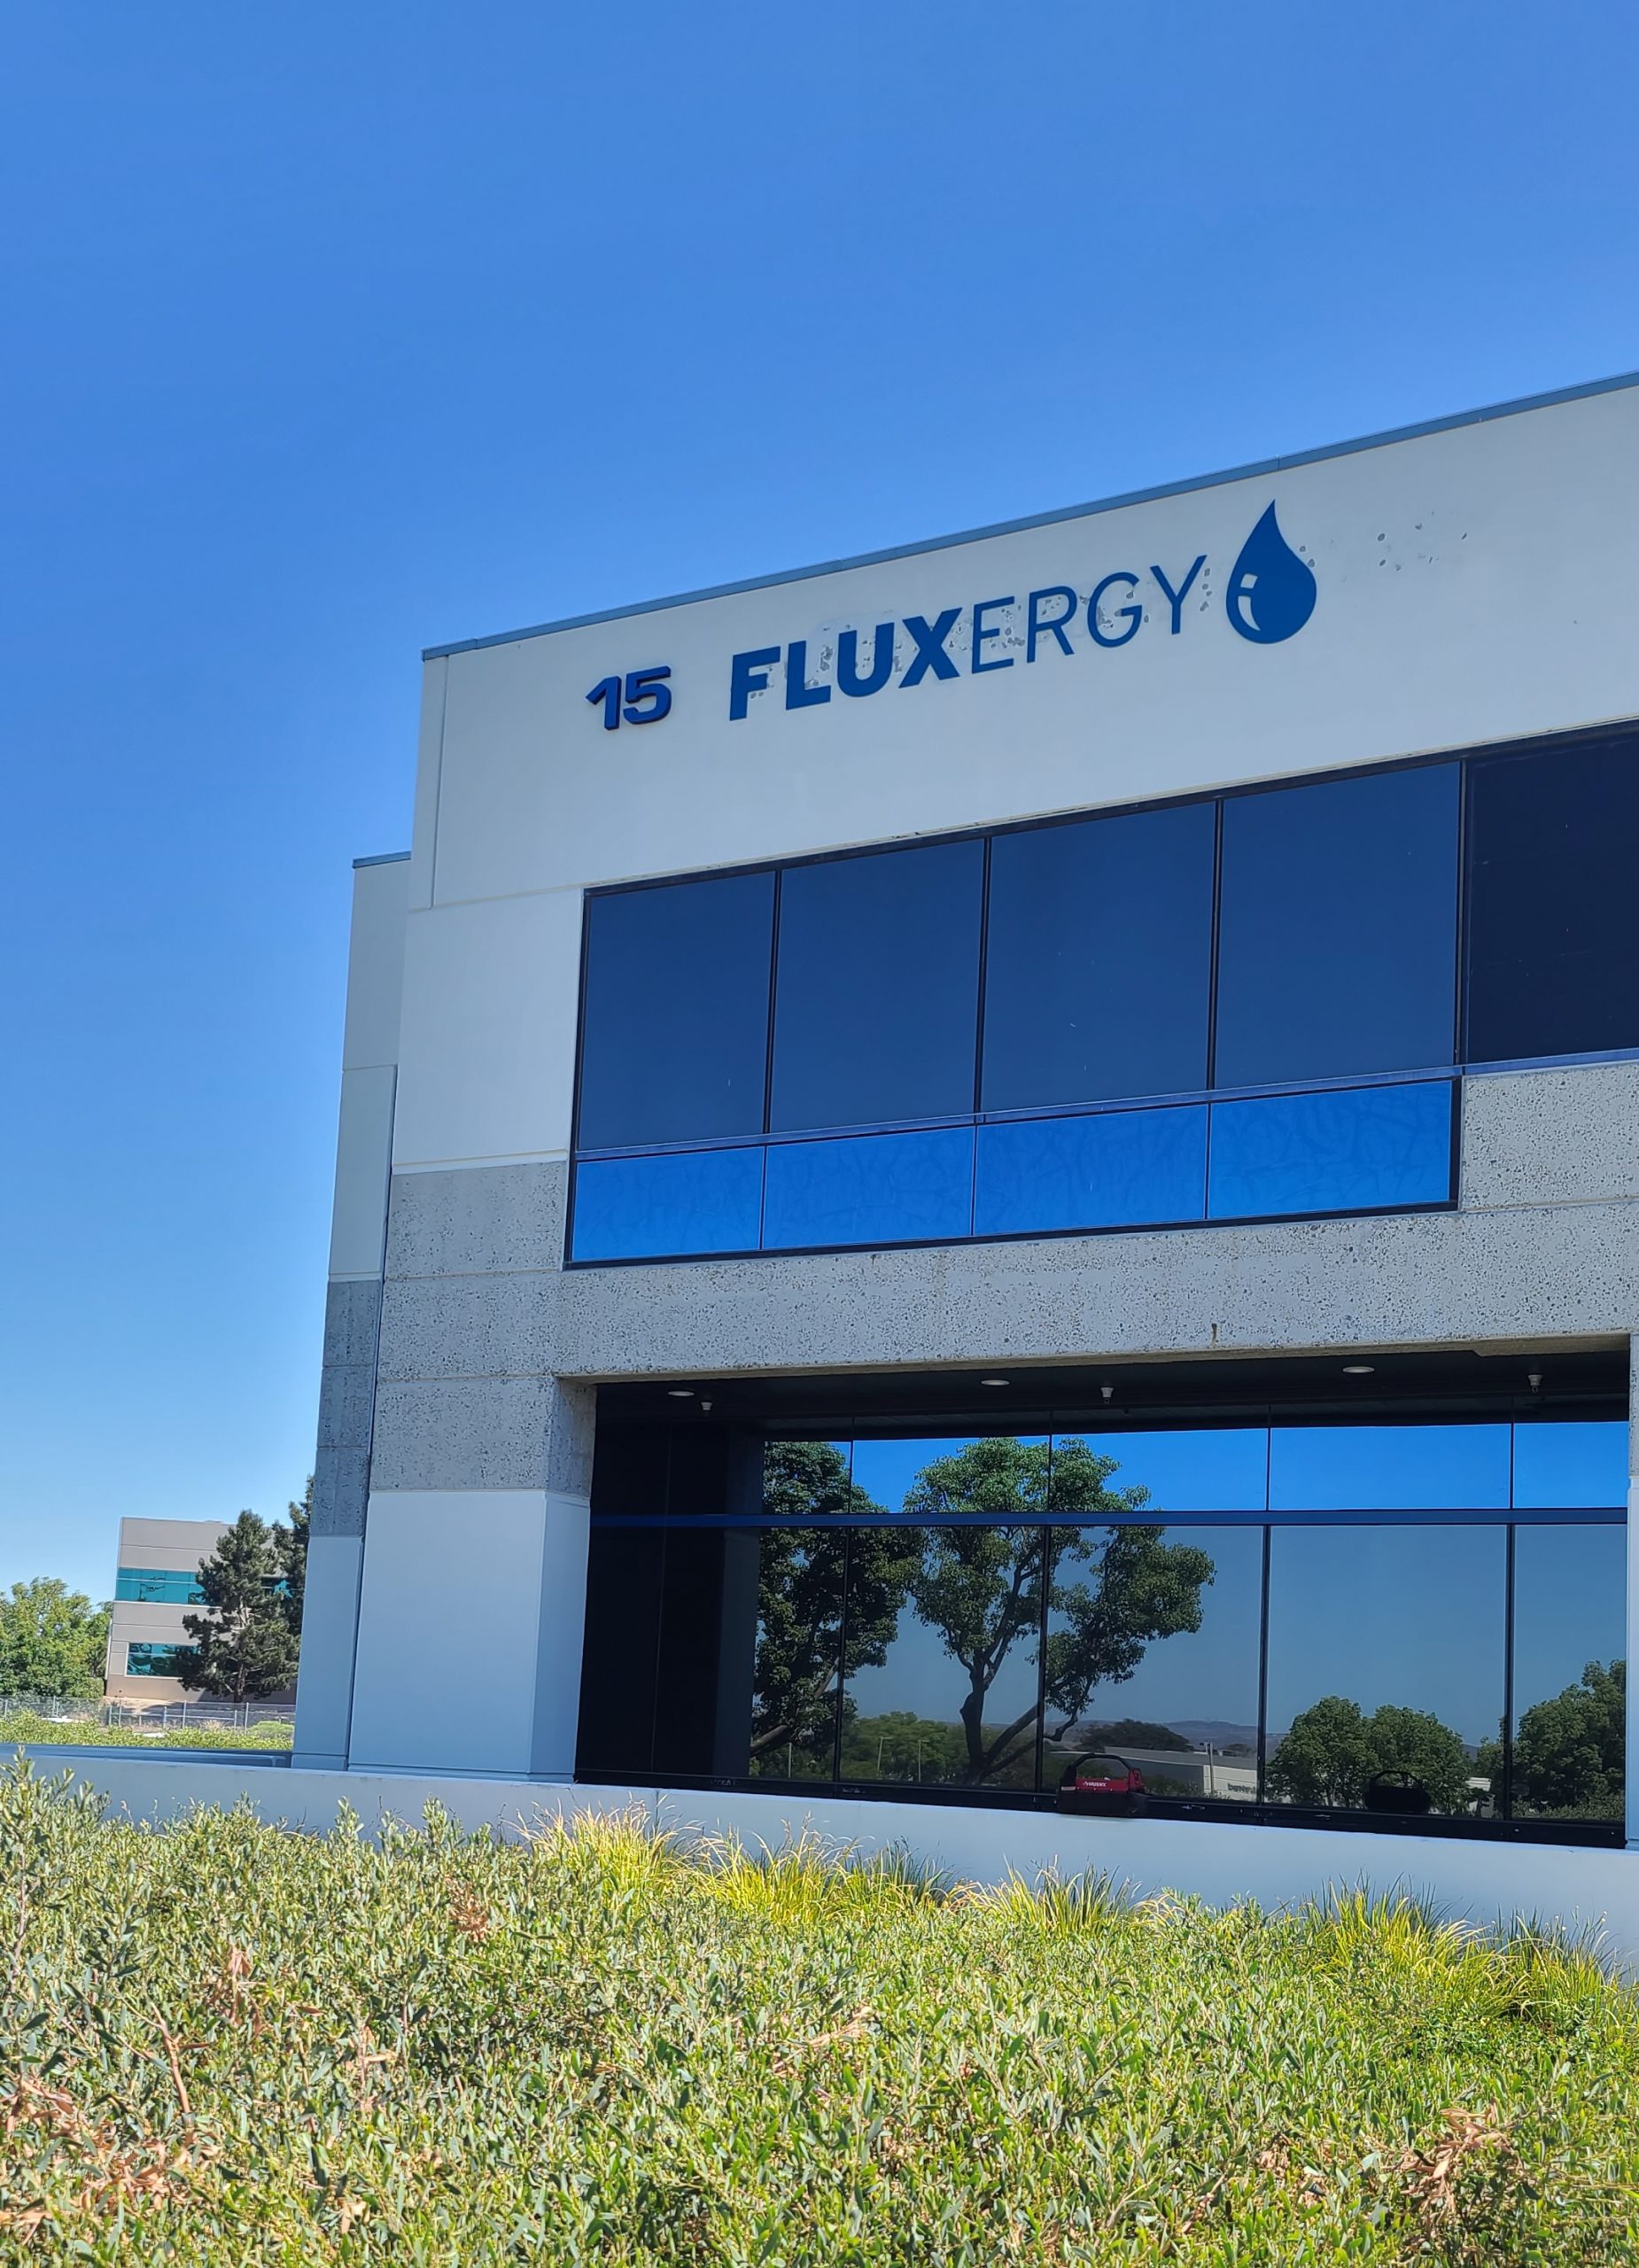 These are the exterior dimensional letter sign sets we fabricated and installed for Fluxergy as part of a sign package for their Irvine building.